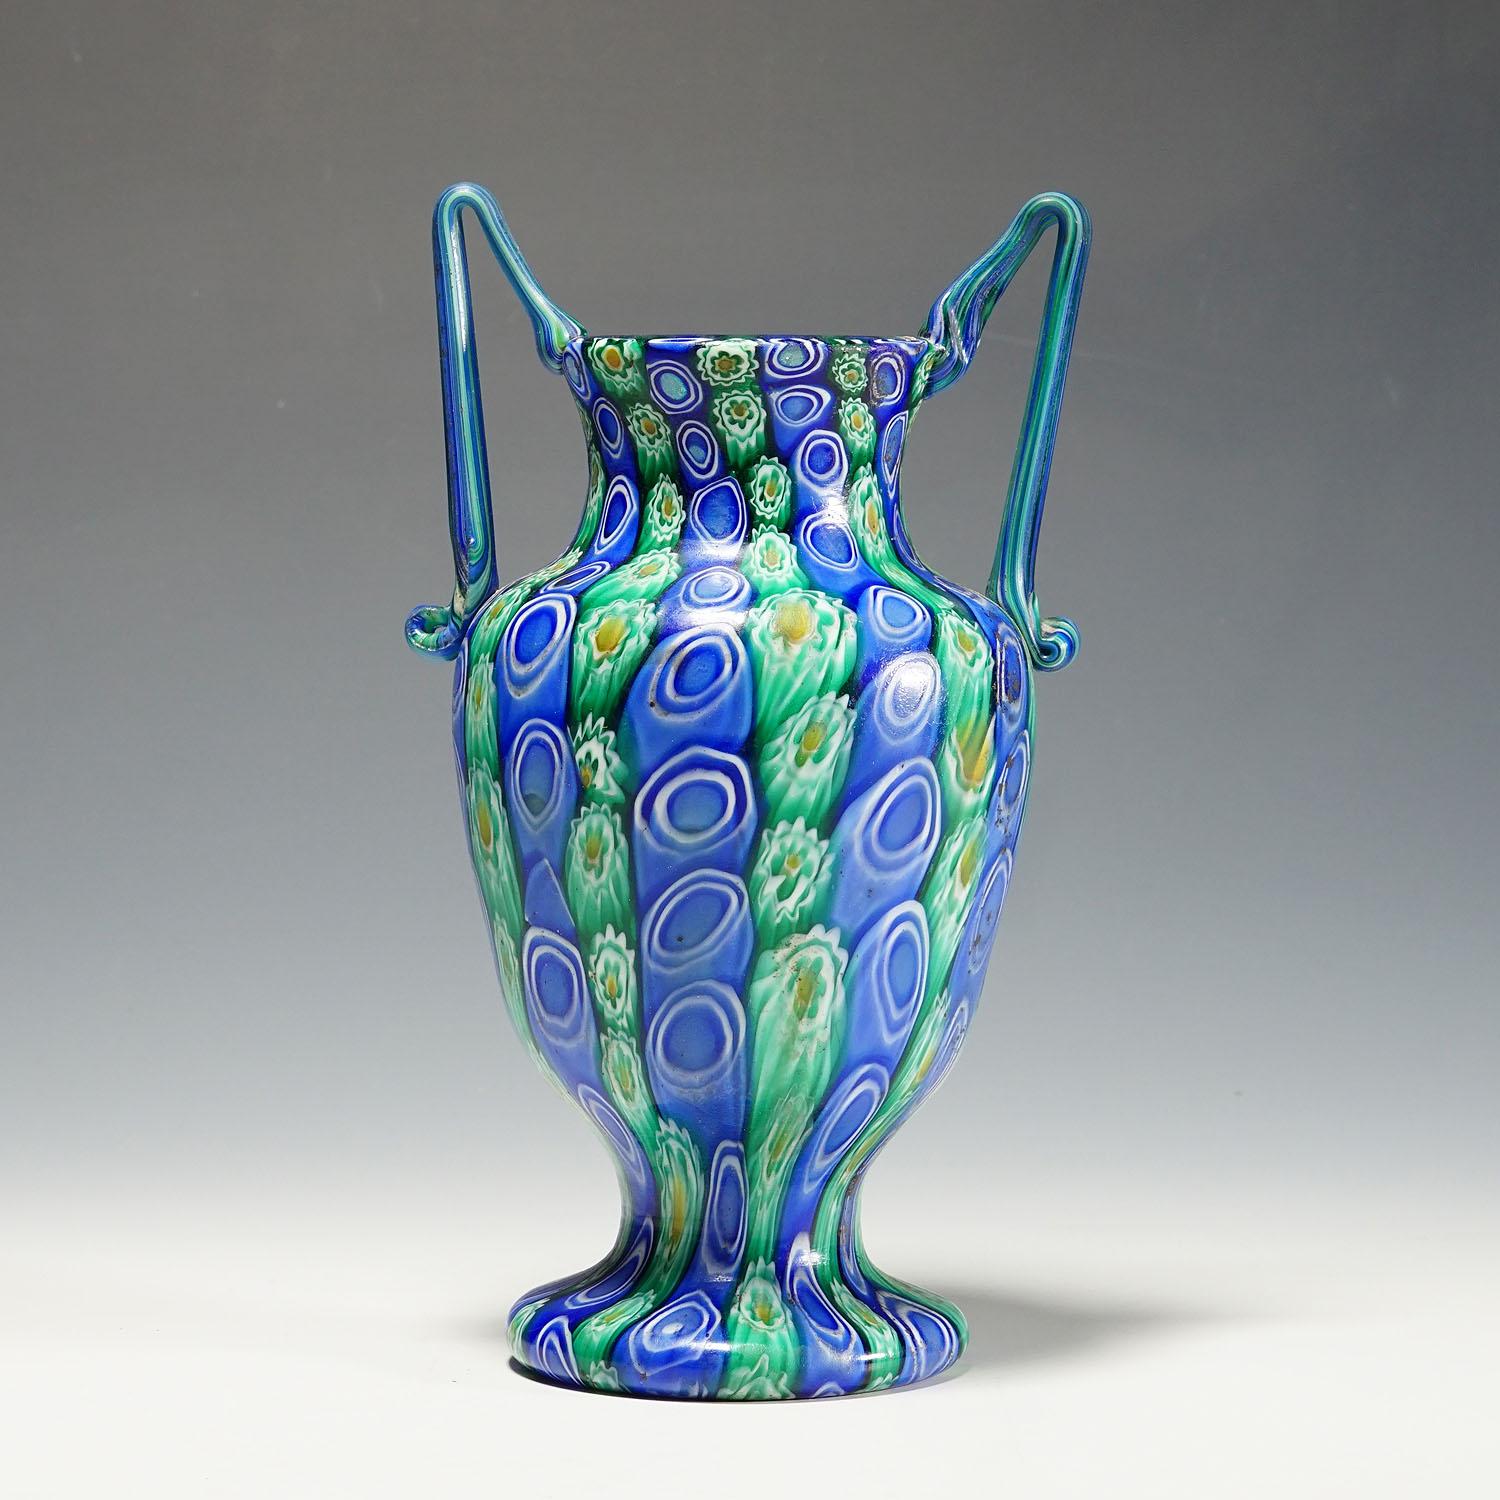 Large Antique Millefiori Vase with Handles, Fratelli Toso Murano circa 1910

A large and rare millefiori murrine glass vase manufactured by Vetreria Fratelli Toso, Murano around 1910. Made of polycrome murrines (blue, green, yellow and white) which